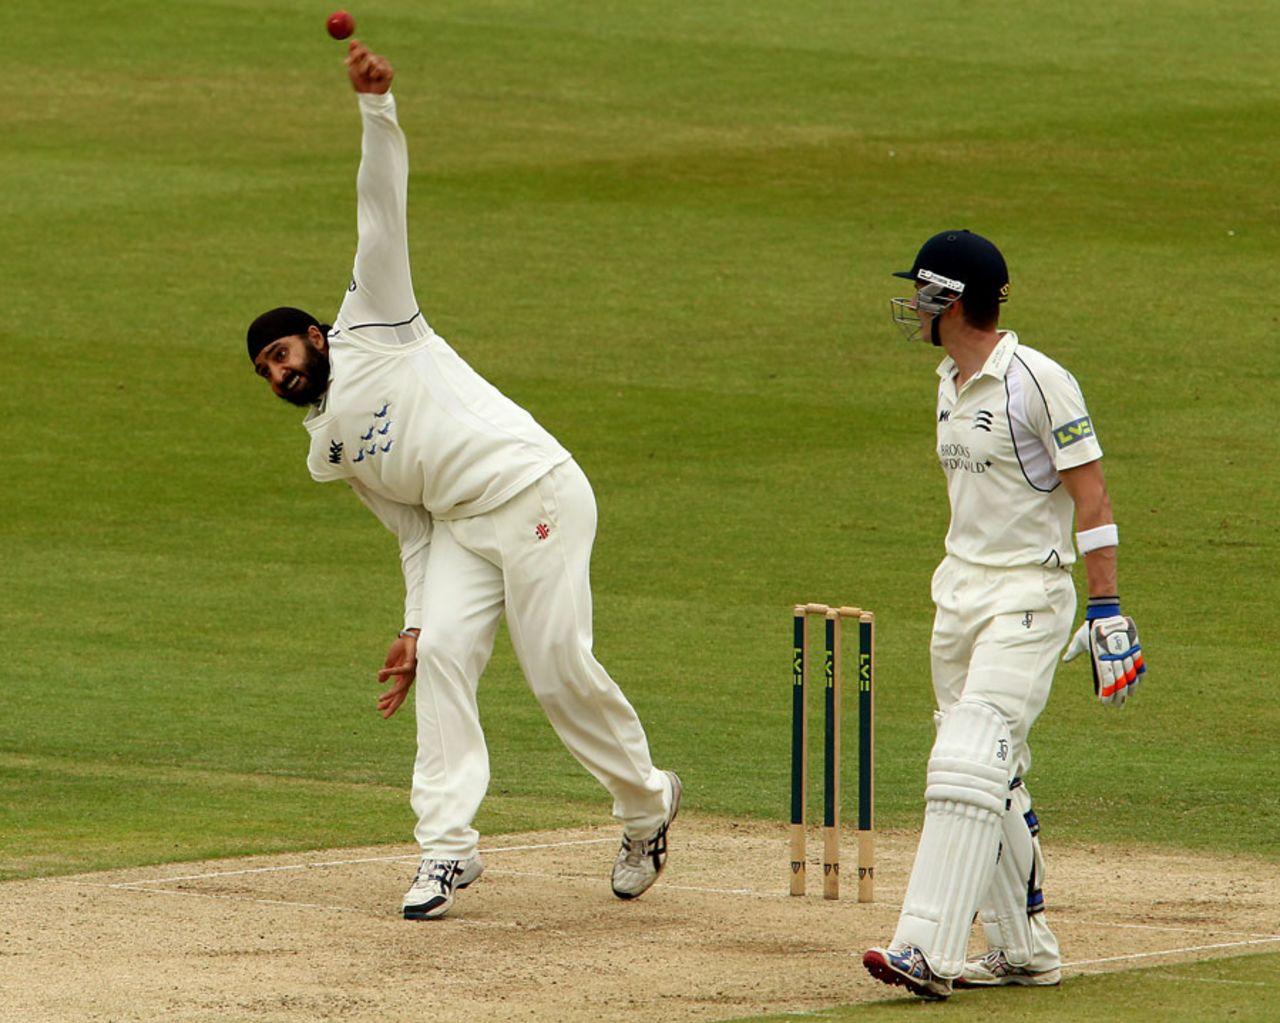 Monty Panesar claimed one wicket as Sussex struggled for breakthroughs, Middlesex v Sussex, County Championship, Division One, Lord's, 2nd day, May 31, 2012